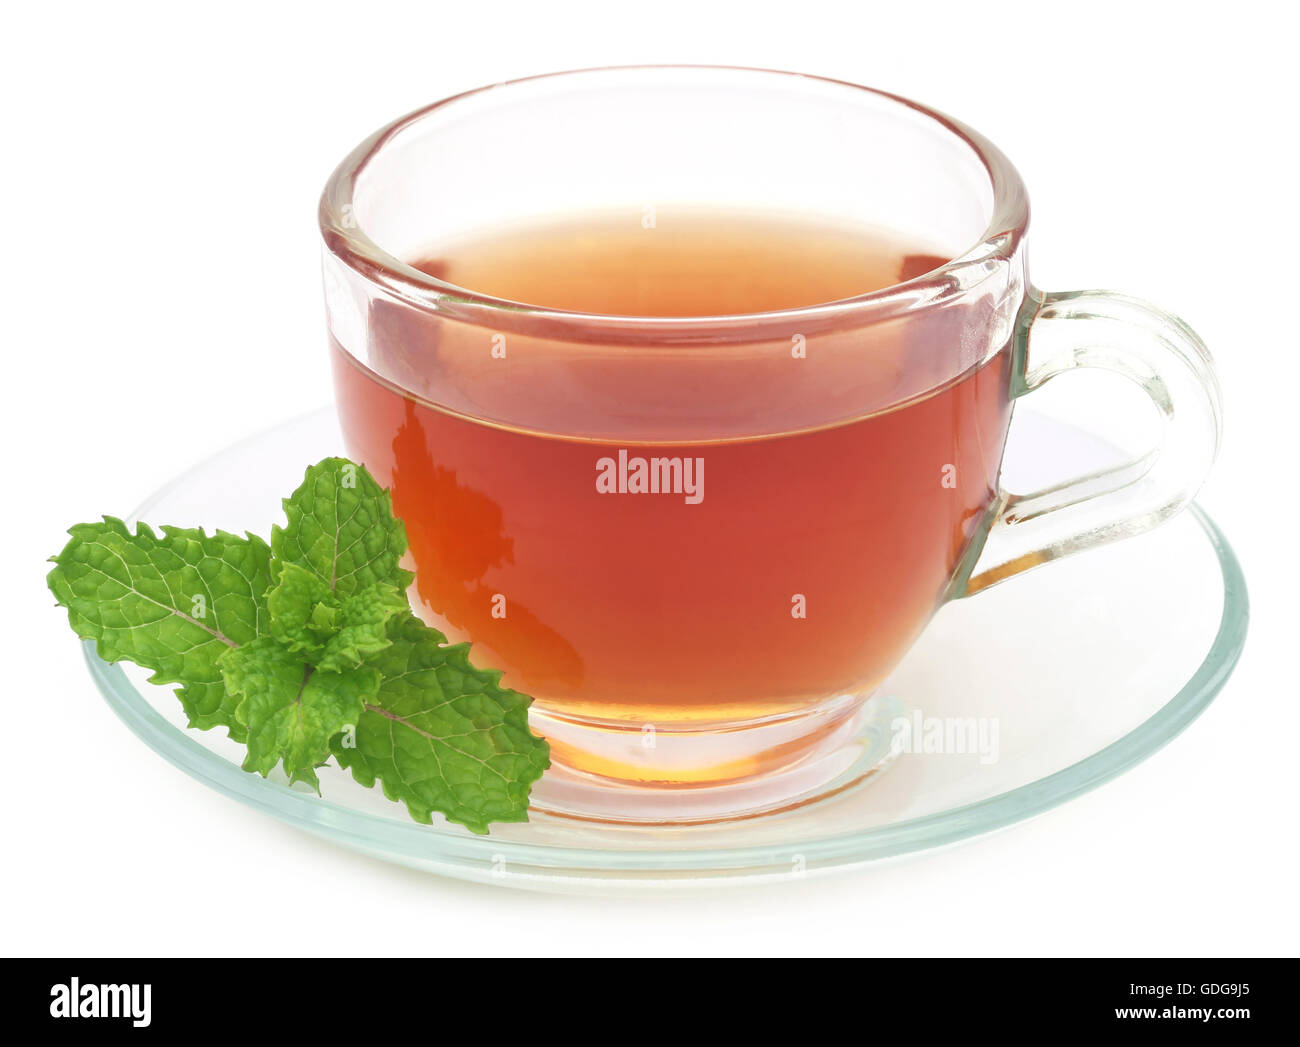 Herbal tea in a cup with mint leaves over white background Stock Photo